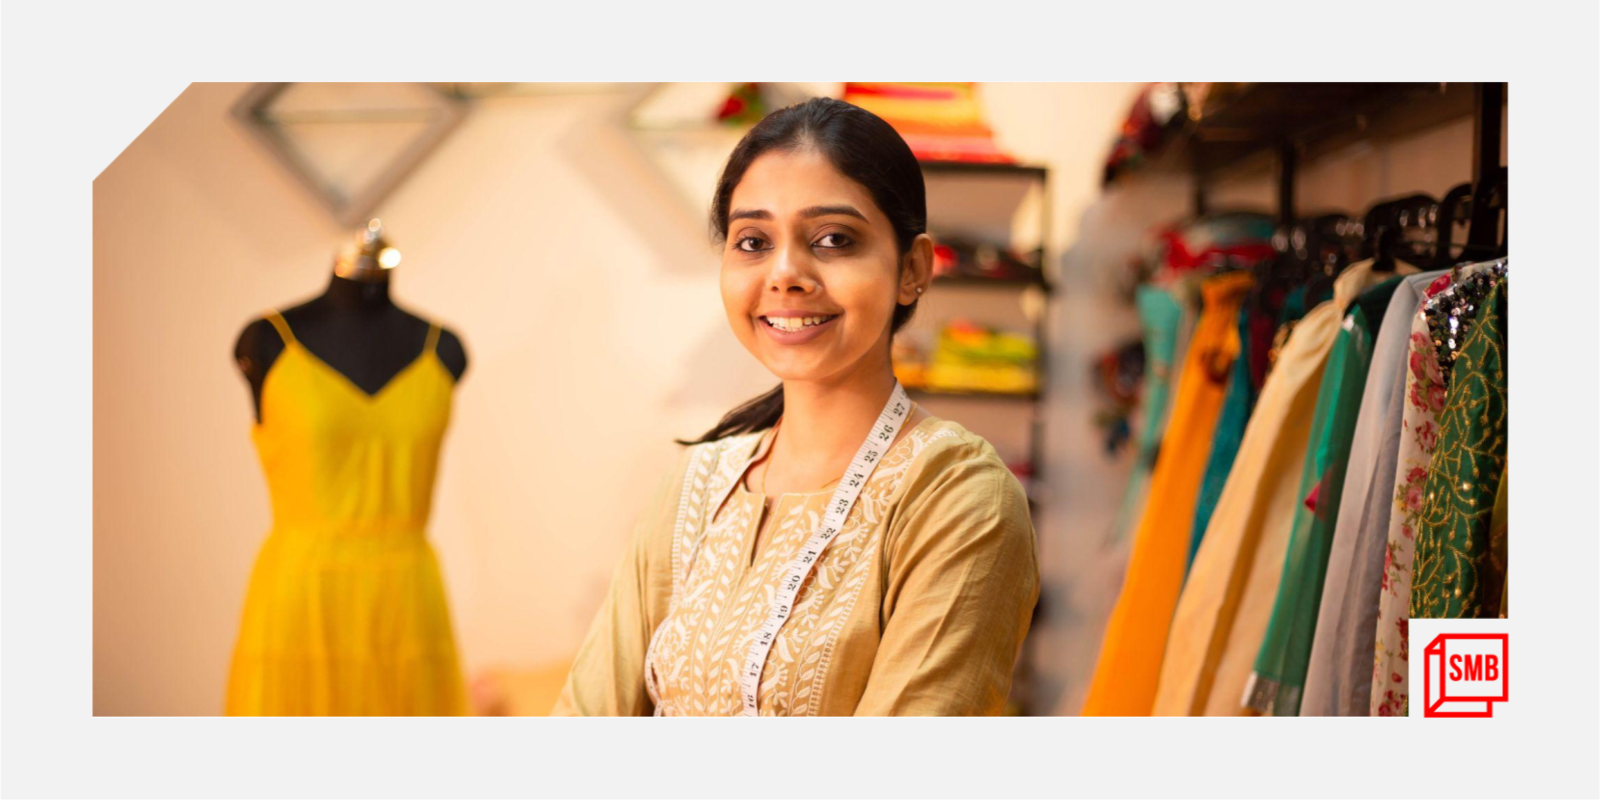 How to start an online fashion business with Rs 10,000 initial